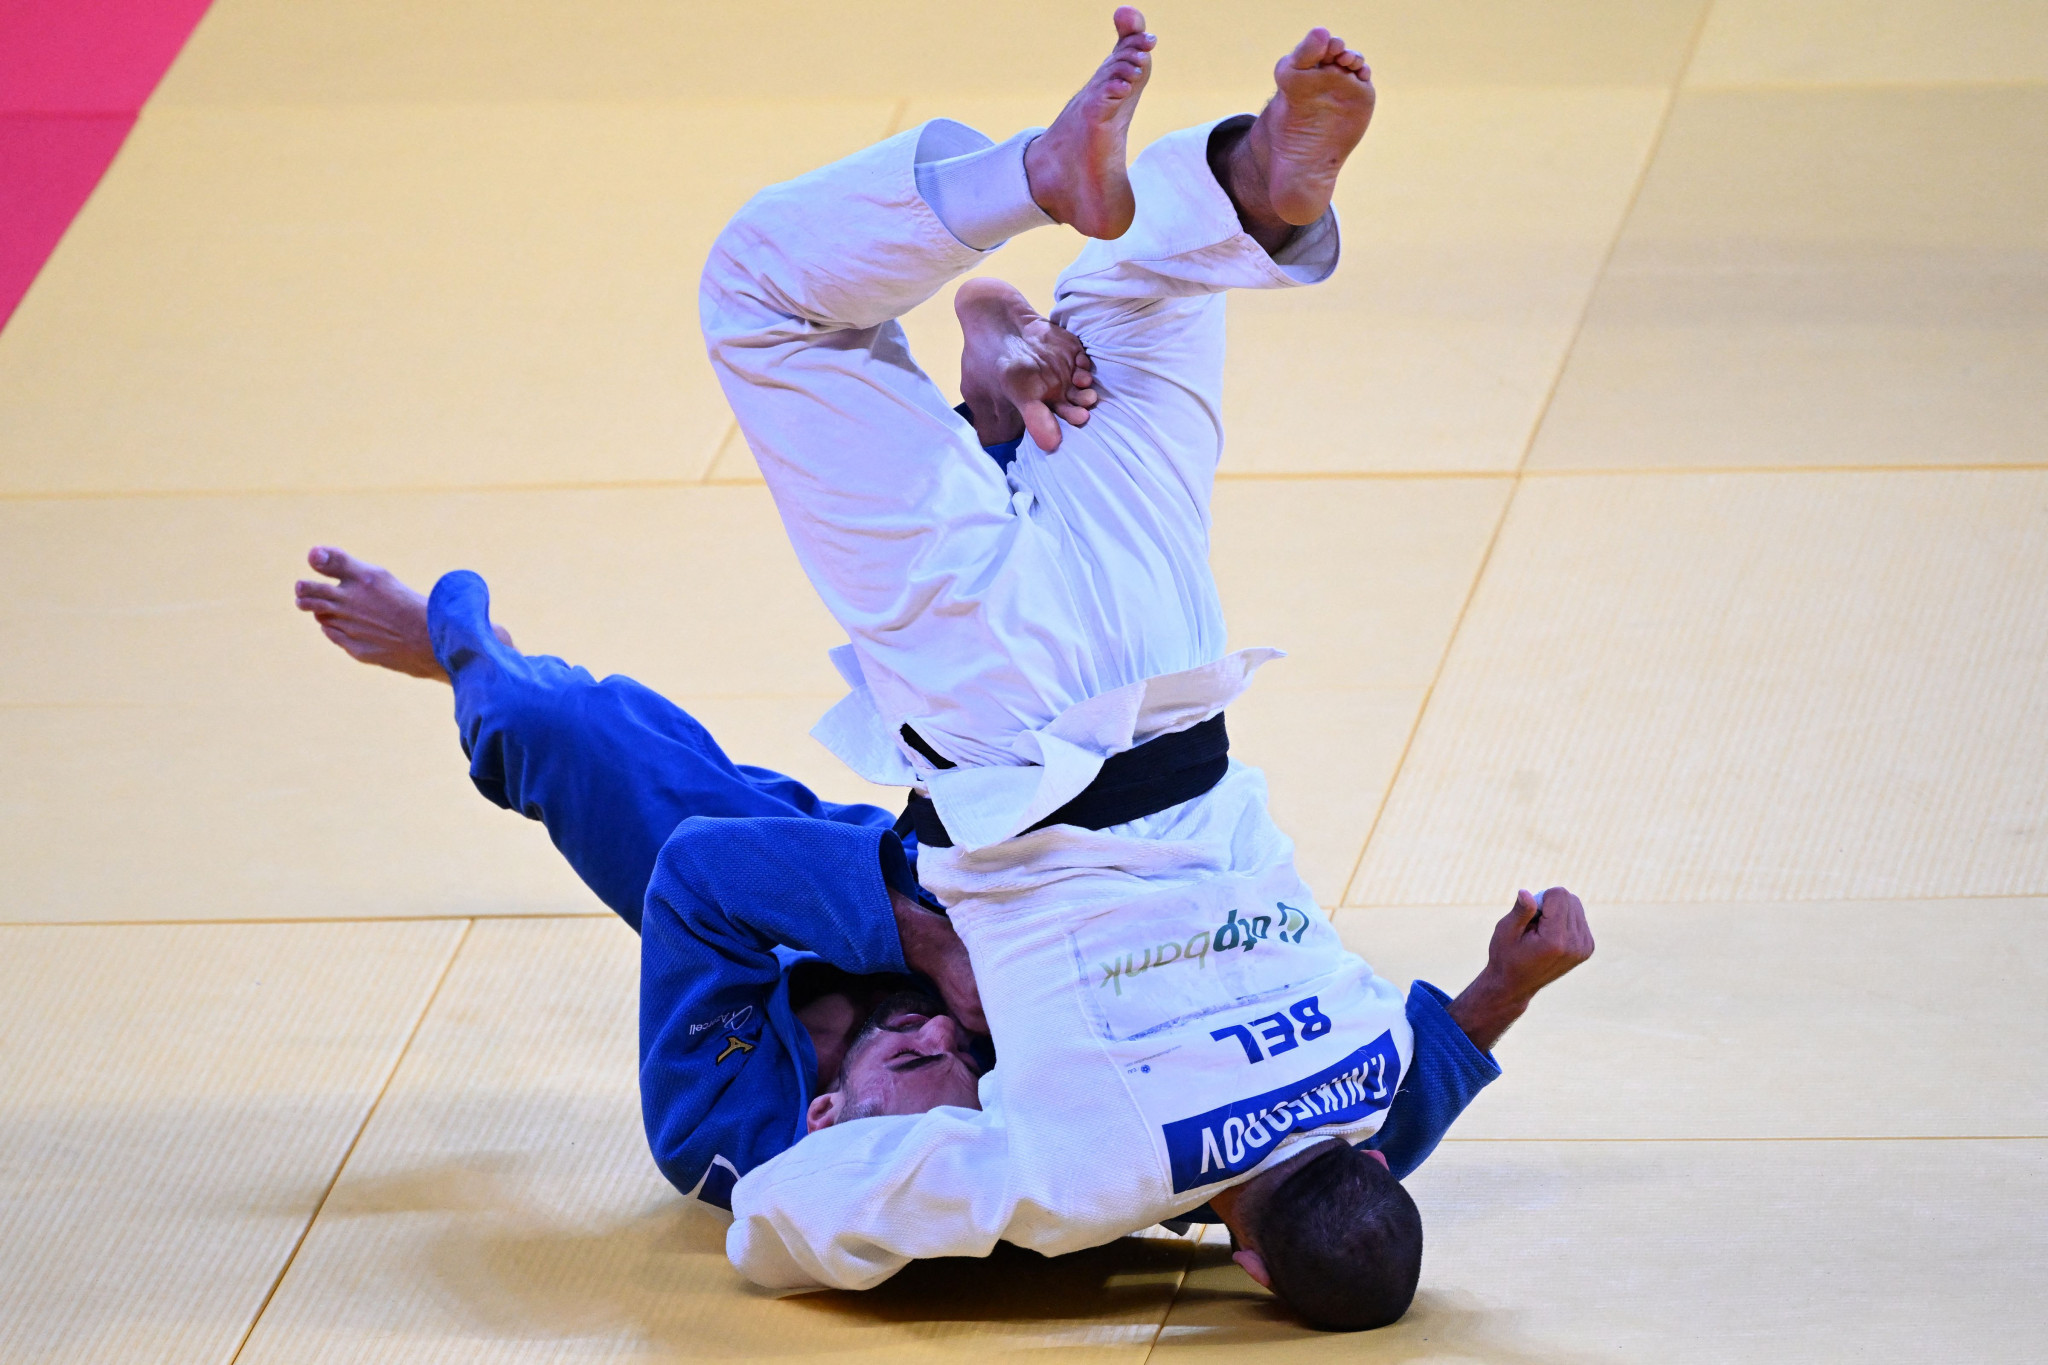 Kotsoiev clinches hosts top spot in medals table at IJF Grand Slam in Baku